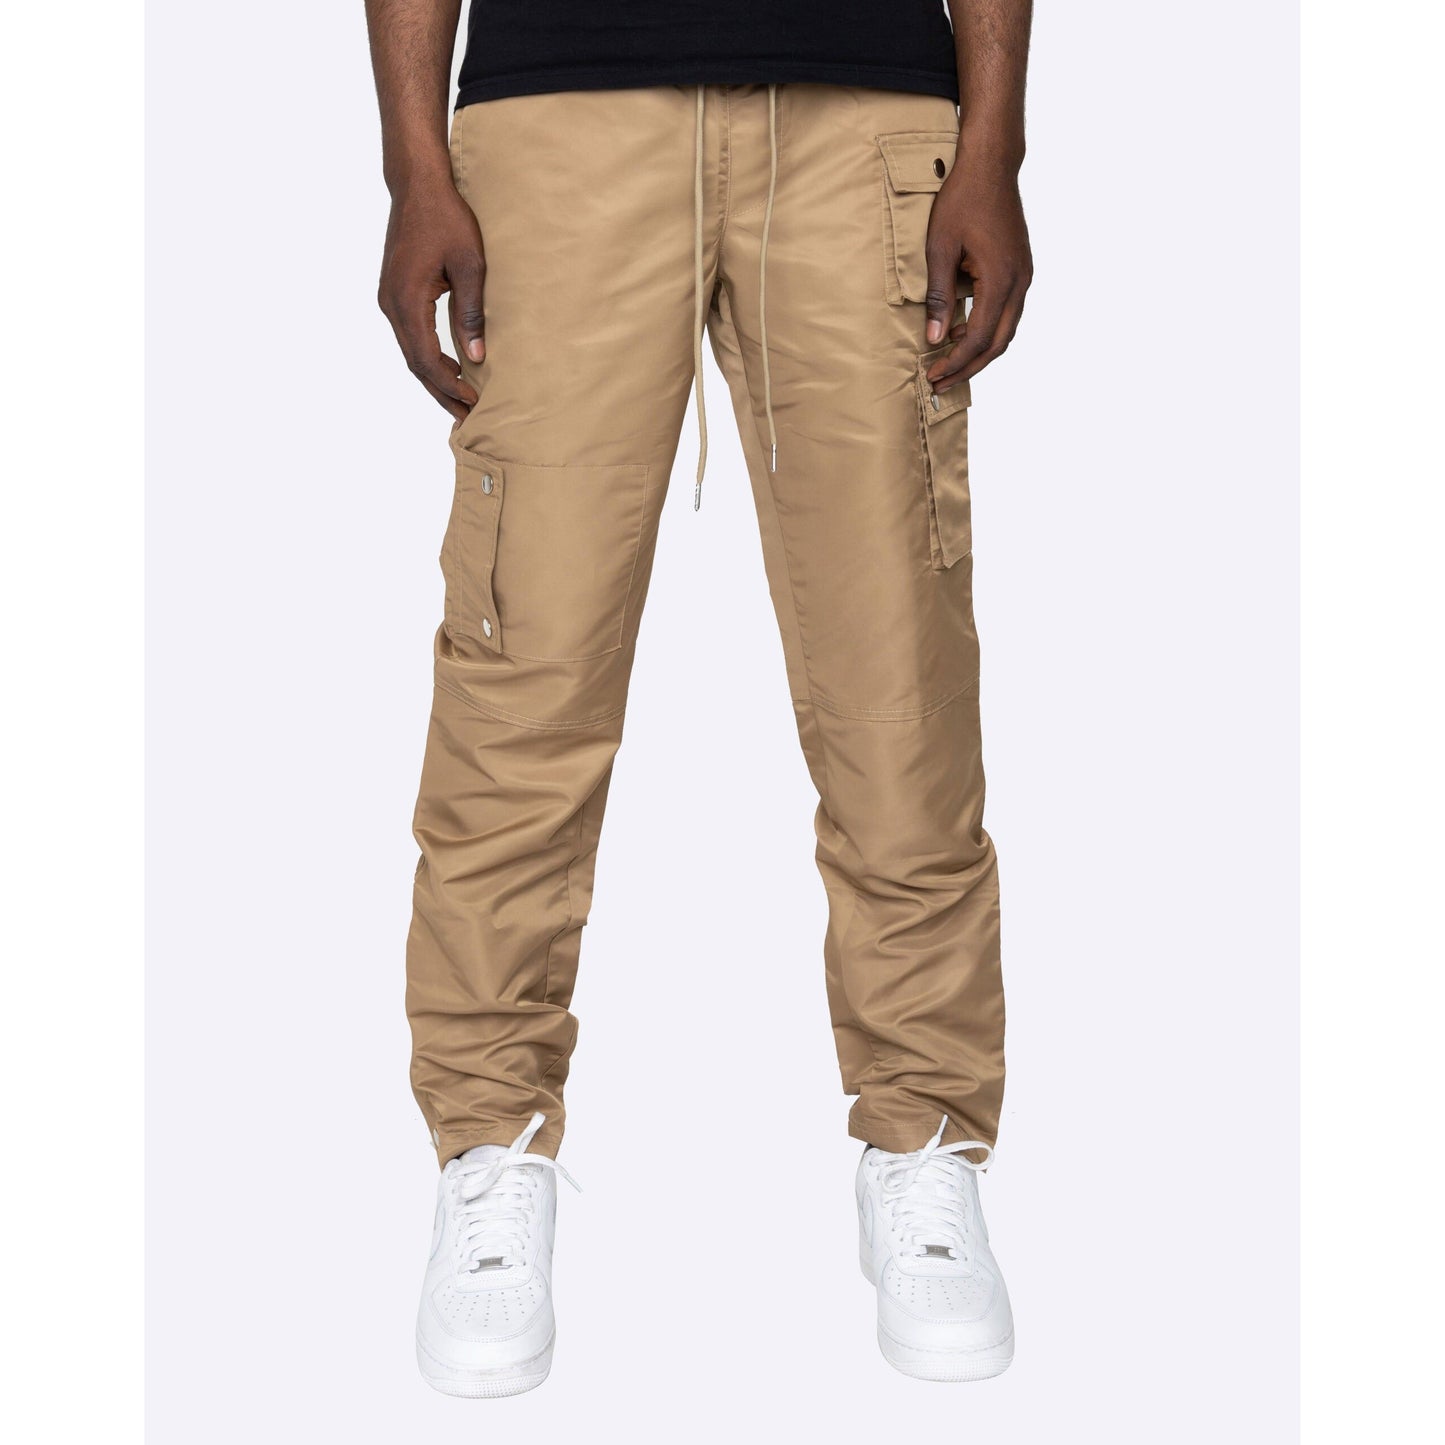 EPTM ROVER UTILITY PANTS - COFFEE